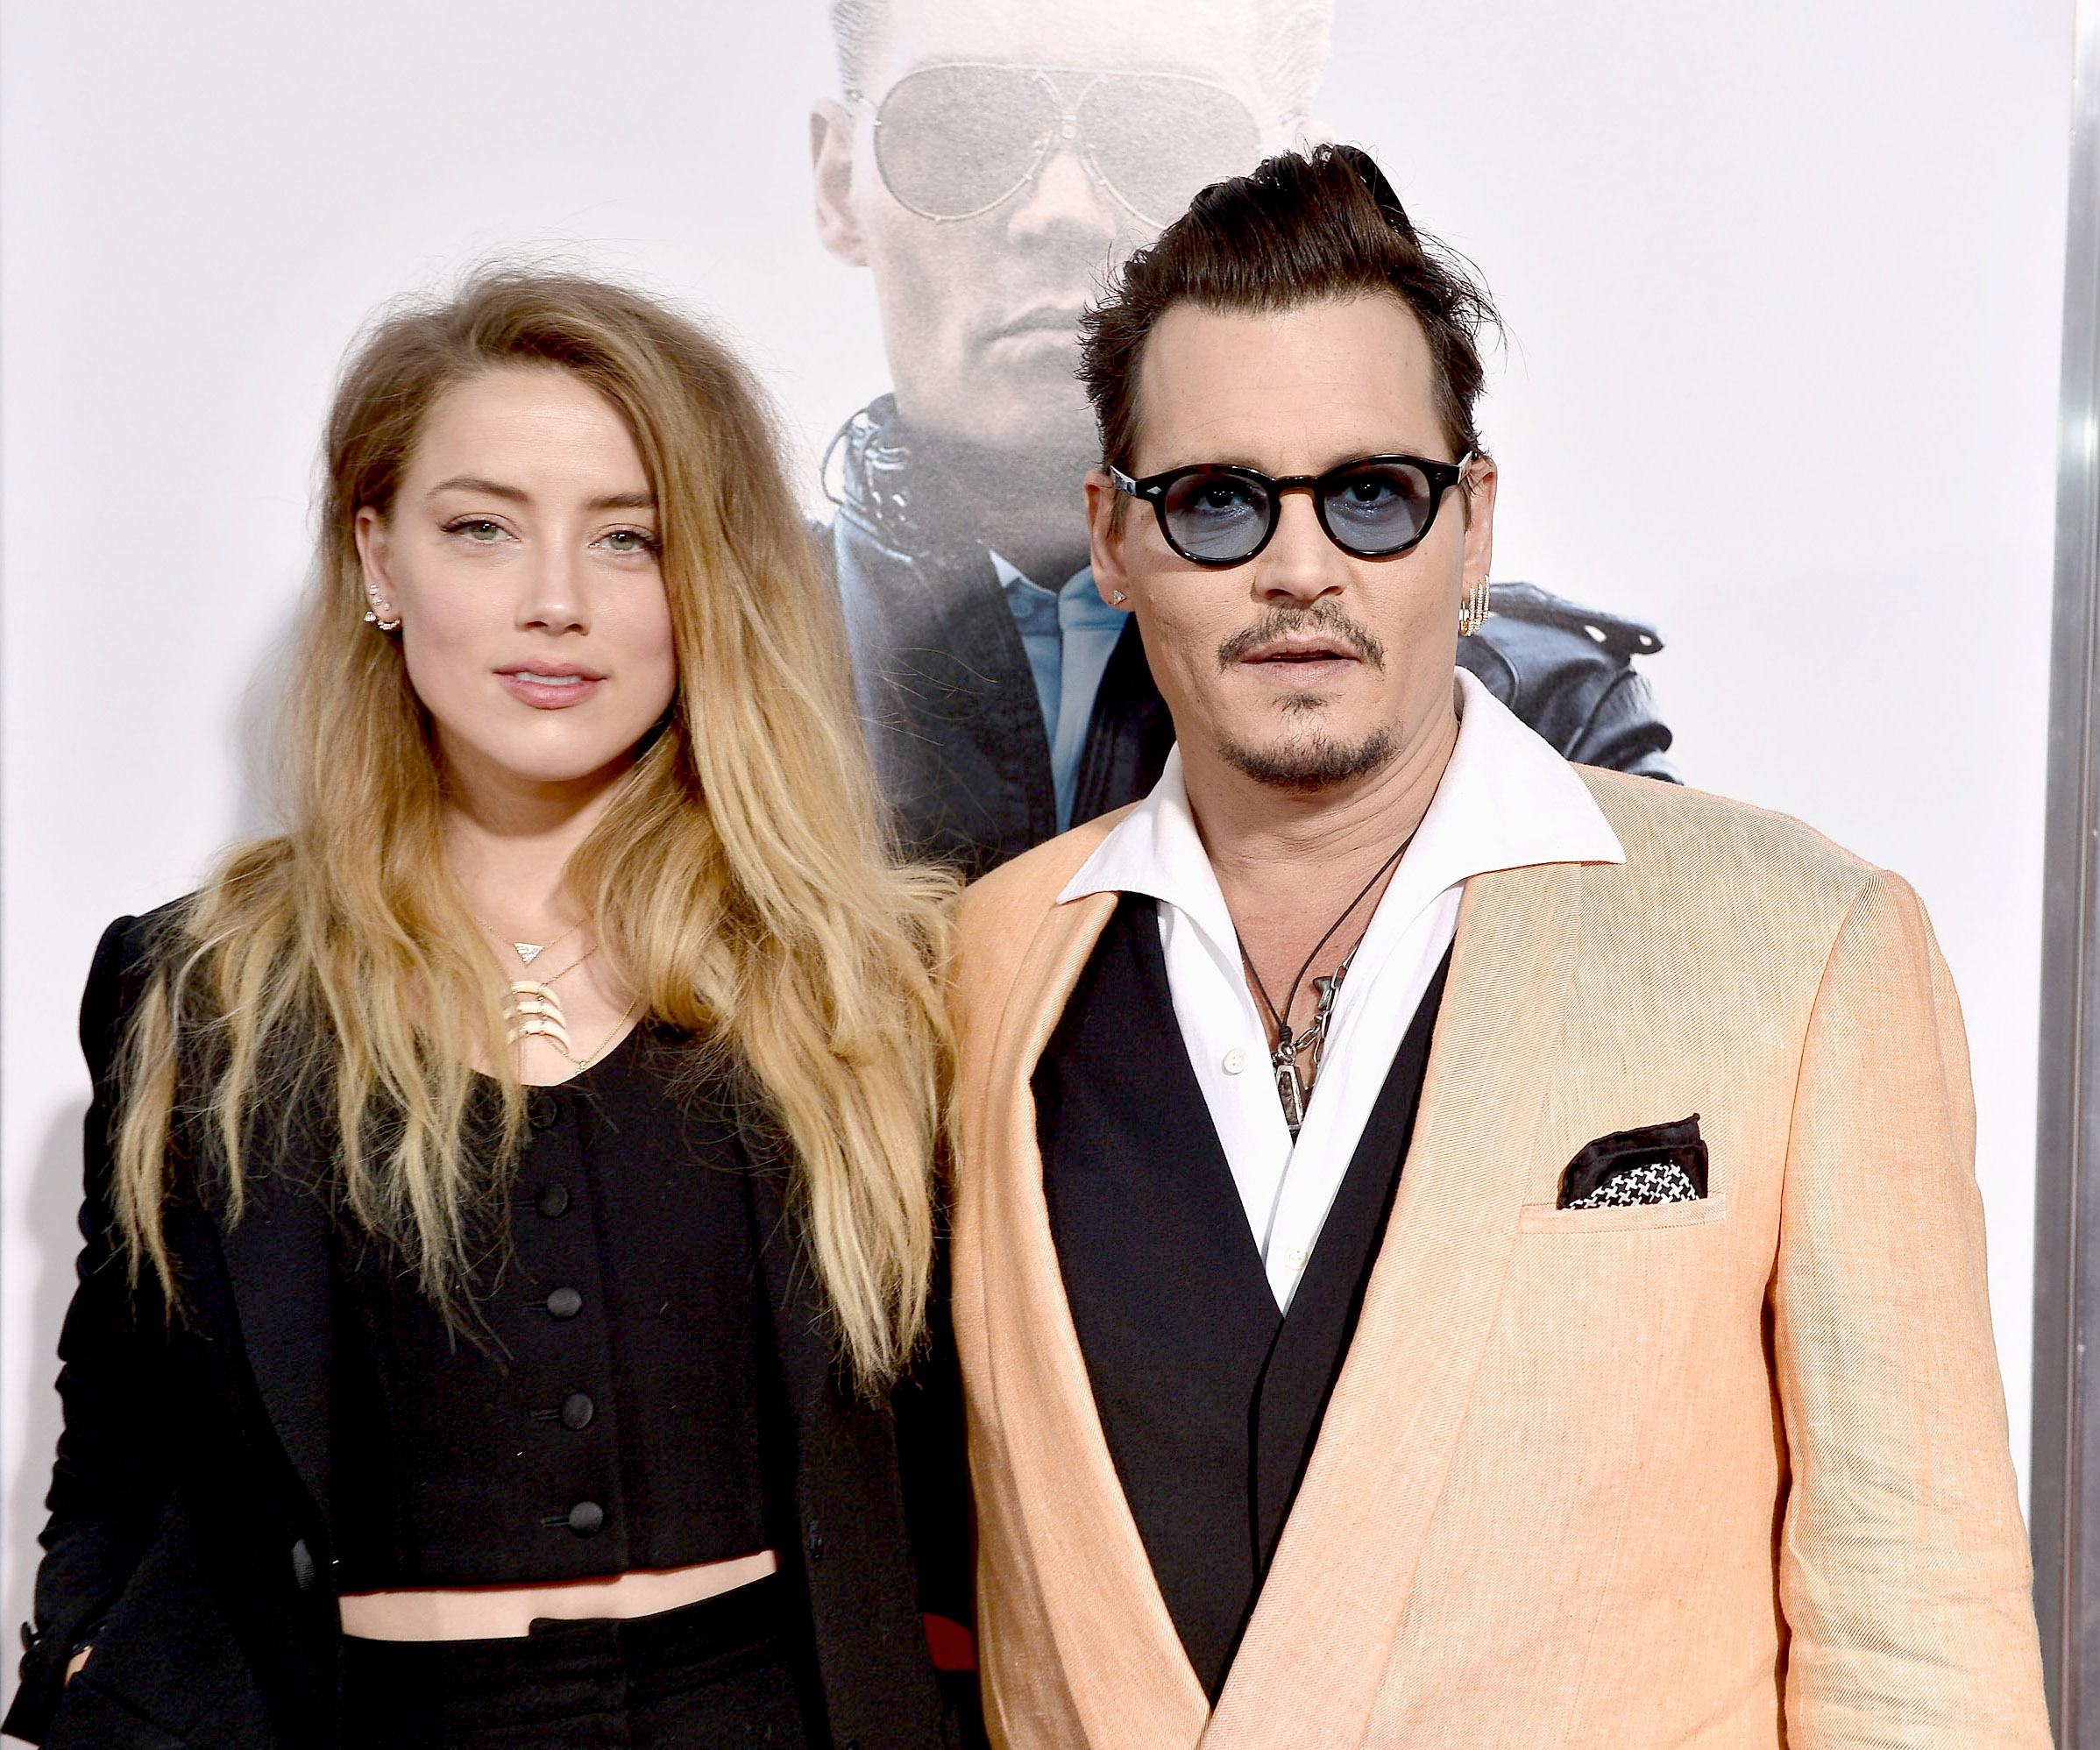 Amber Heard to get $20 million divorce after 15 months of marriage